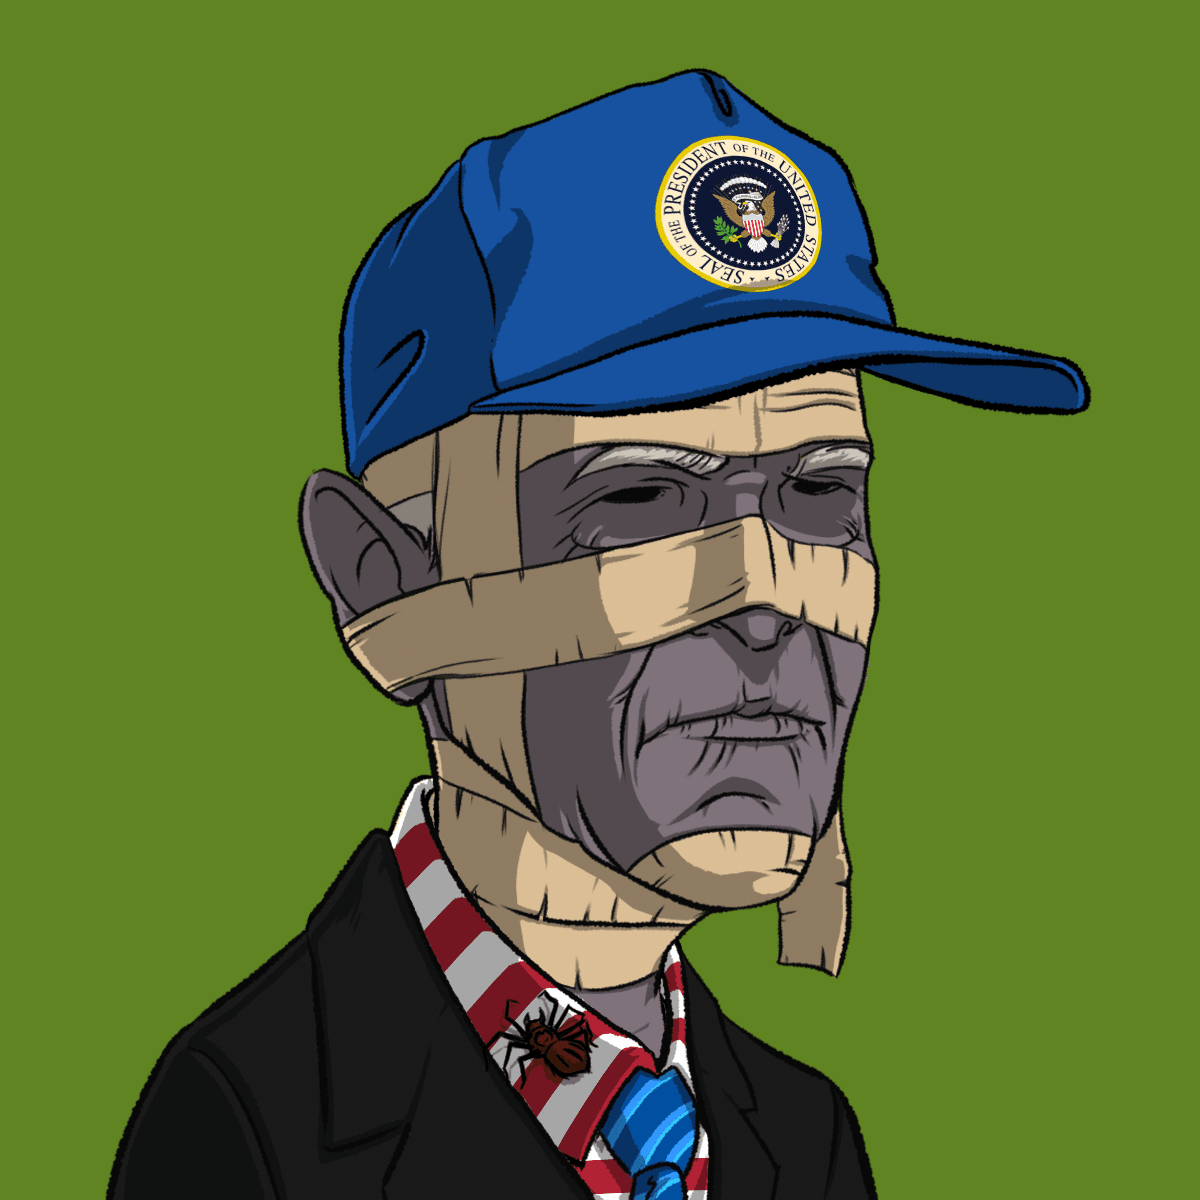 Undead Presidents #111